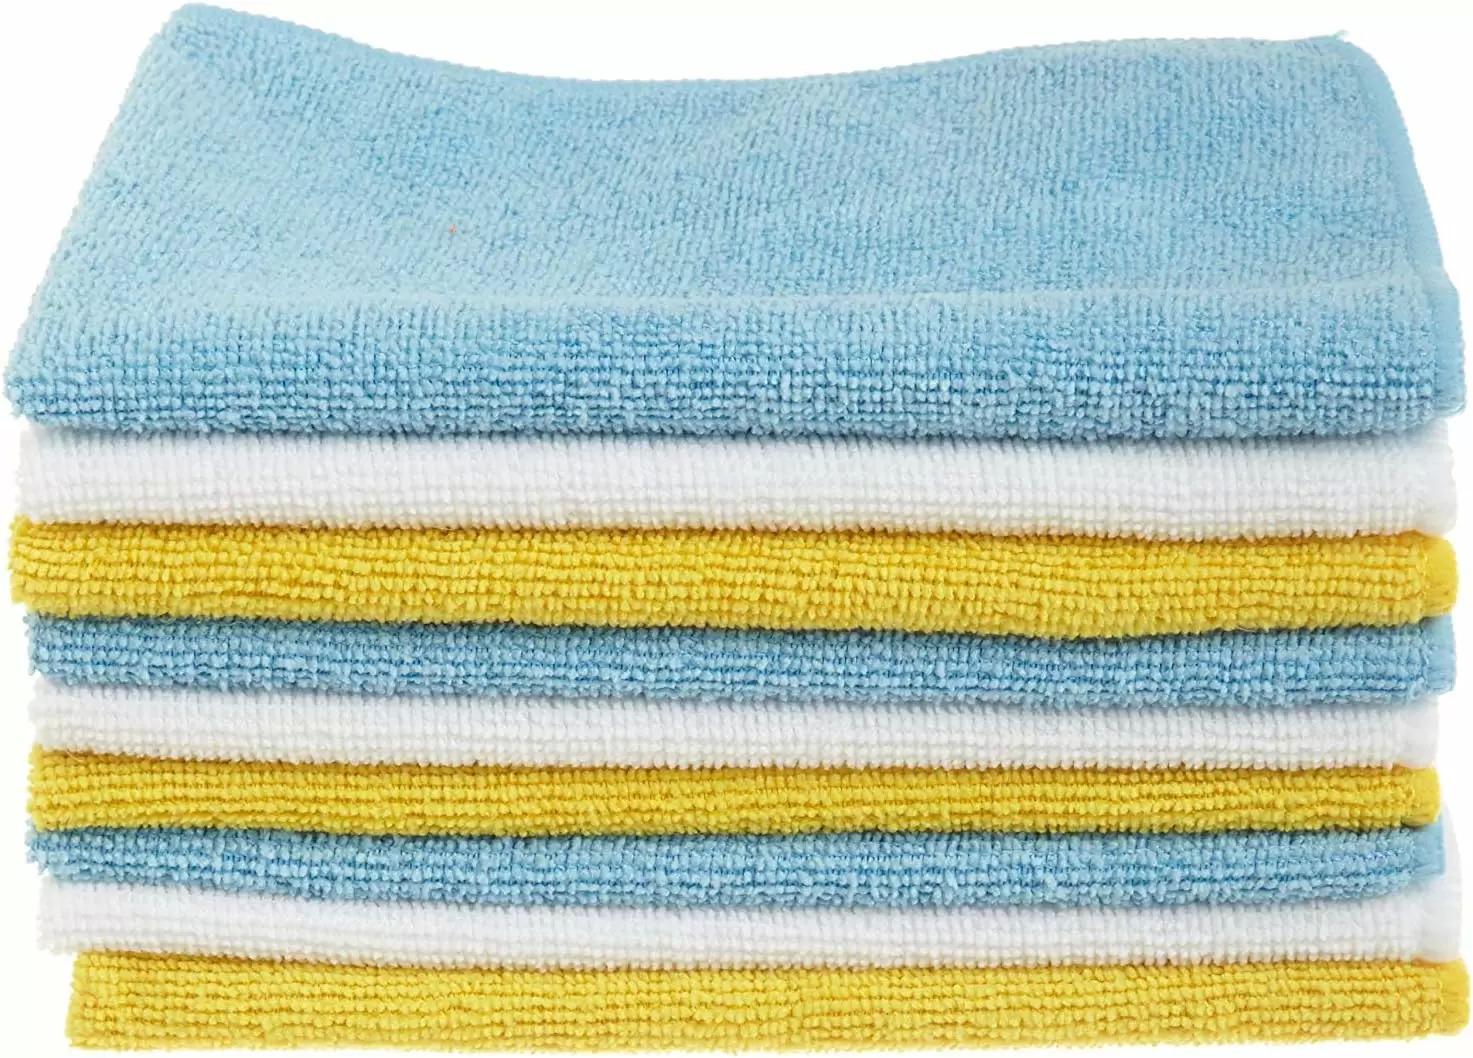 Amazon Basics Microfiber Cleaning Cloths 24 Pack for $8.98